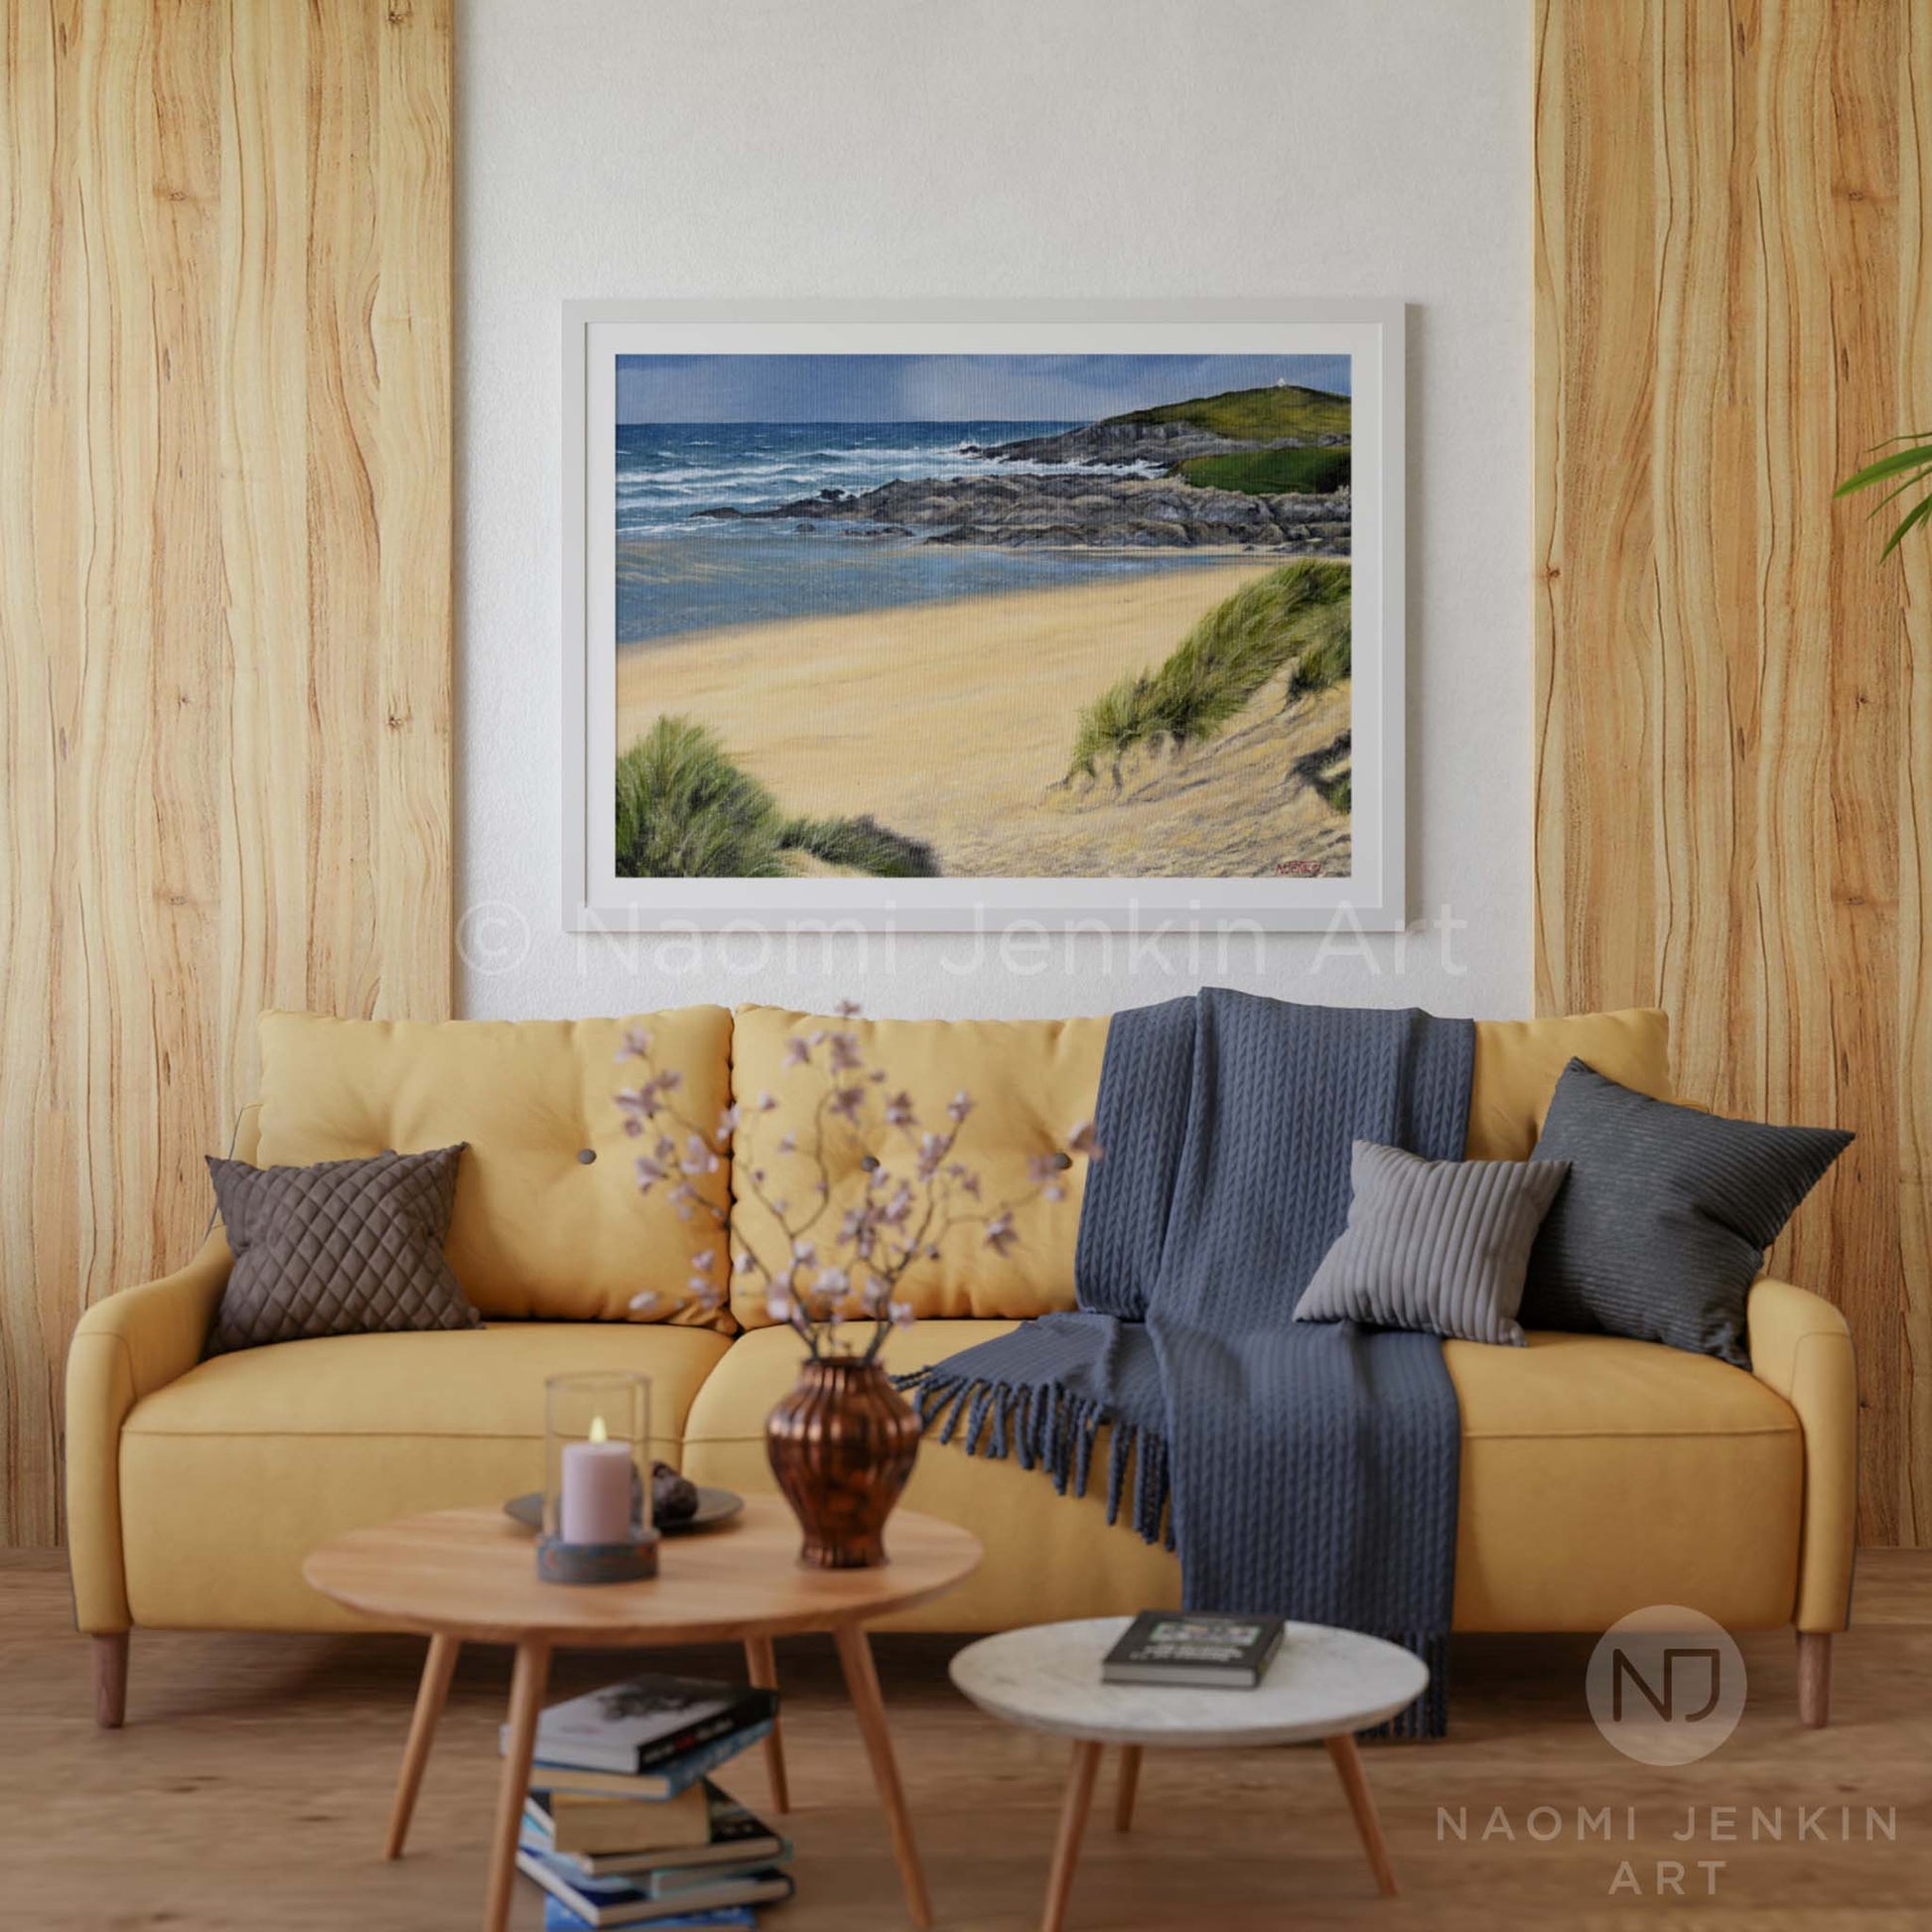 Framed 'Autumn Showers Fistral' seascape print by Naomi Jenkin in a living room setting